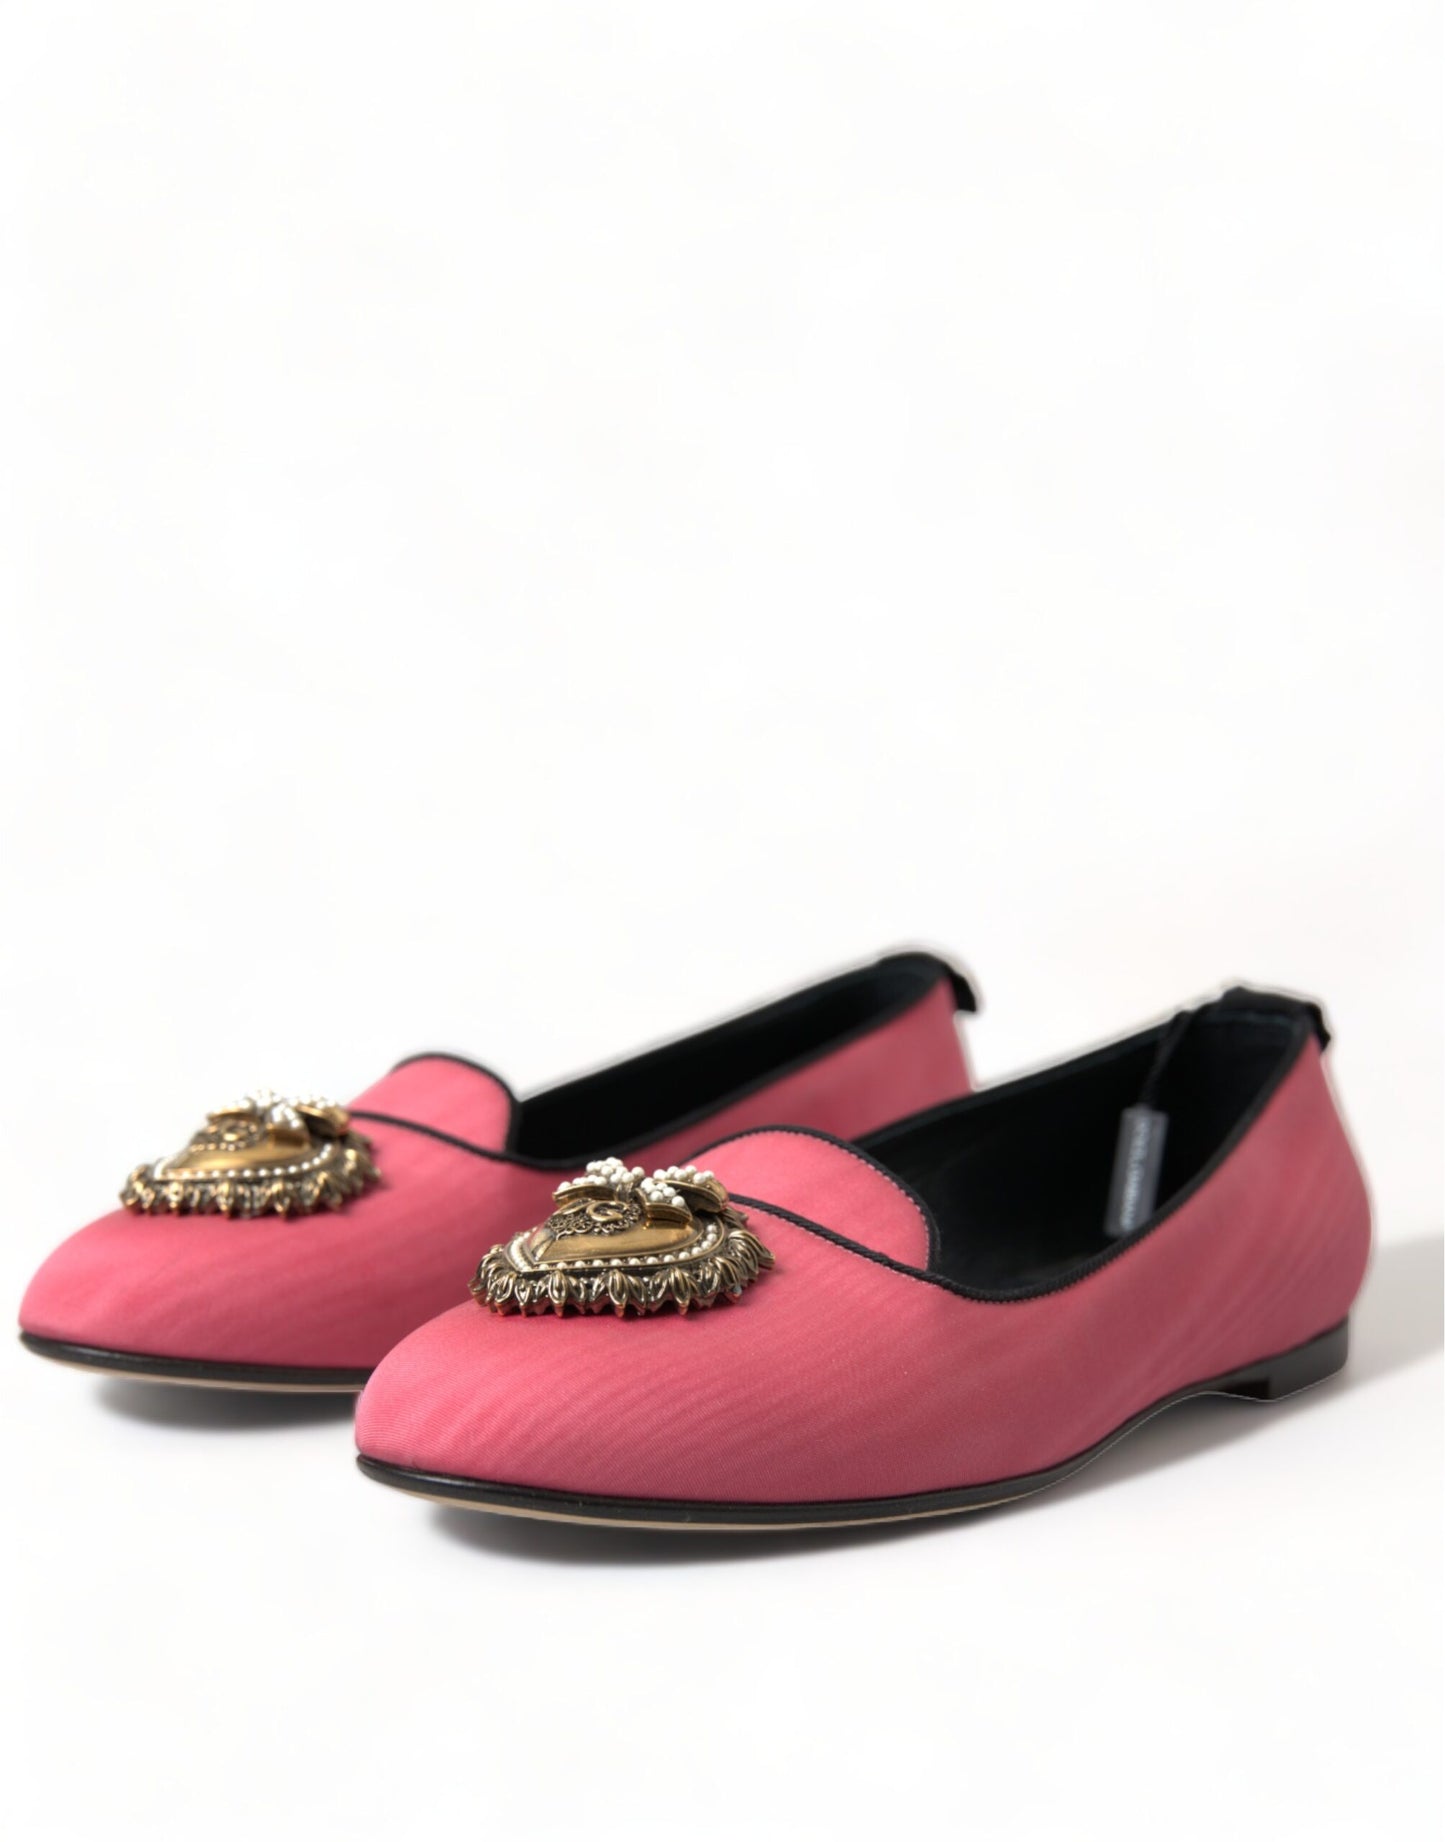 Elegant Moiré Audrey Slippers with Bejeweled Heart